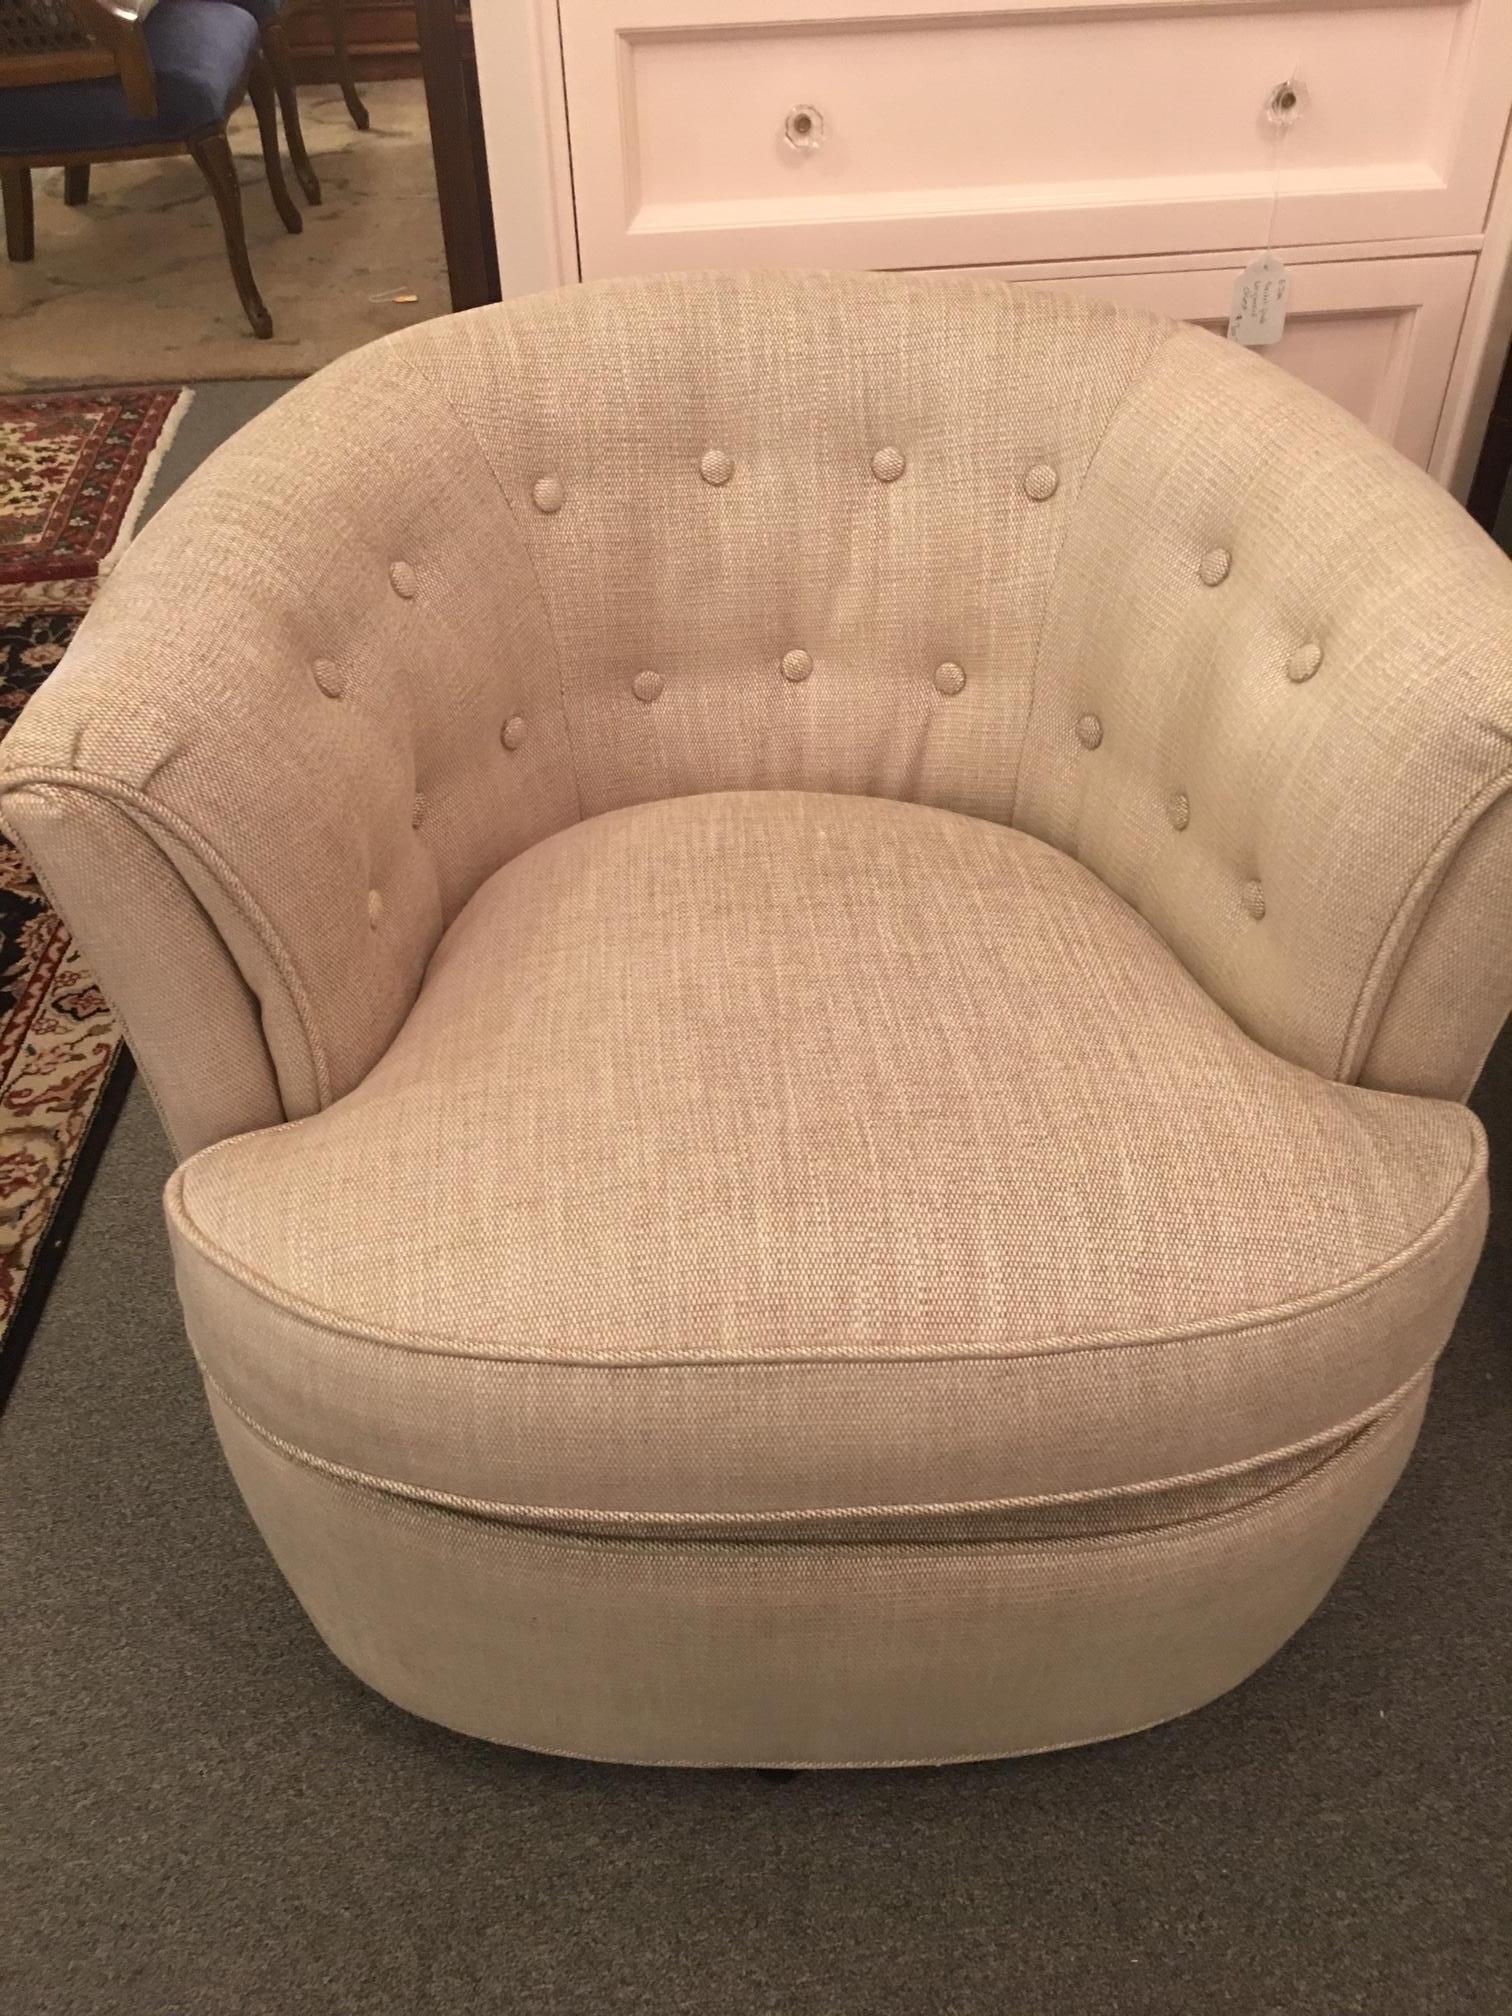 This vintage pair has been restored to a level of cool it probably never knew in that they are now versatile and suitable for this century with the new clean and cool upholstery. The fabric is a very heavy backed linen, not akin to its flimsy